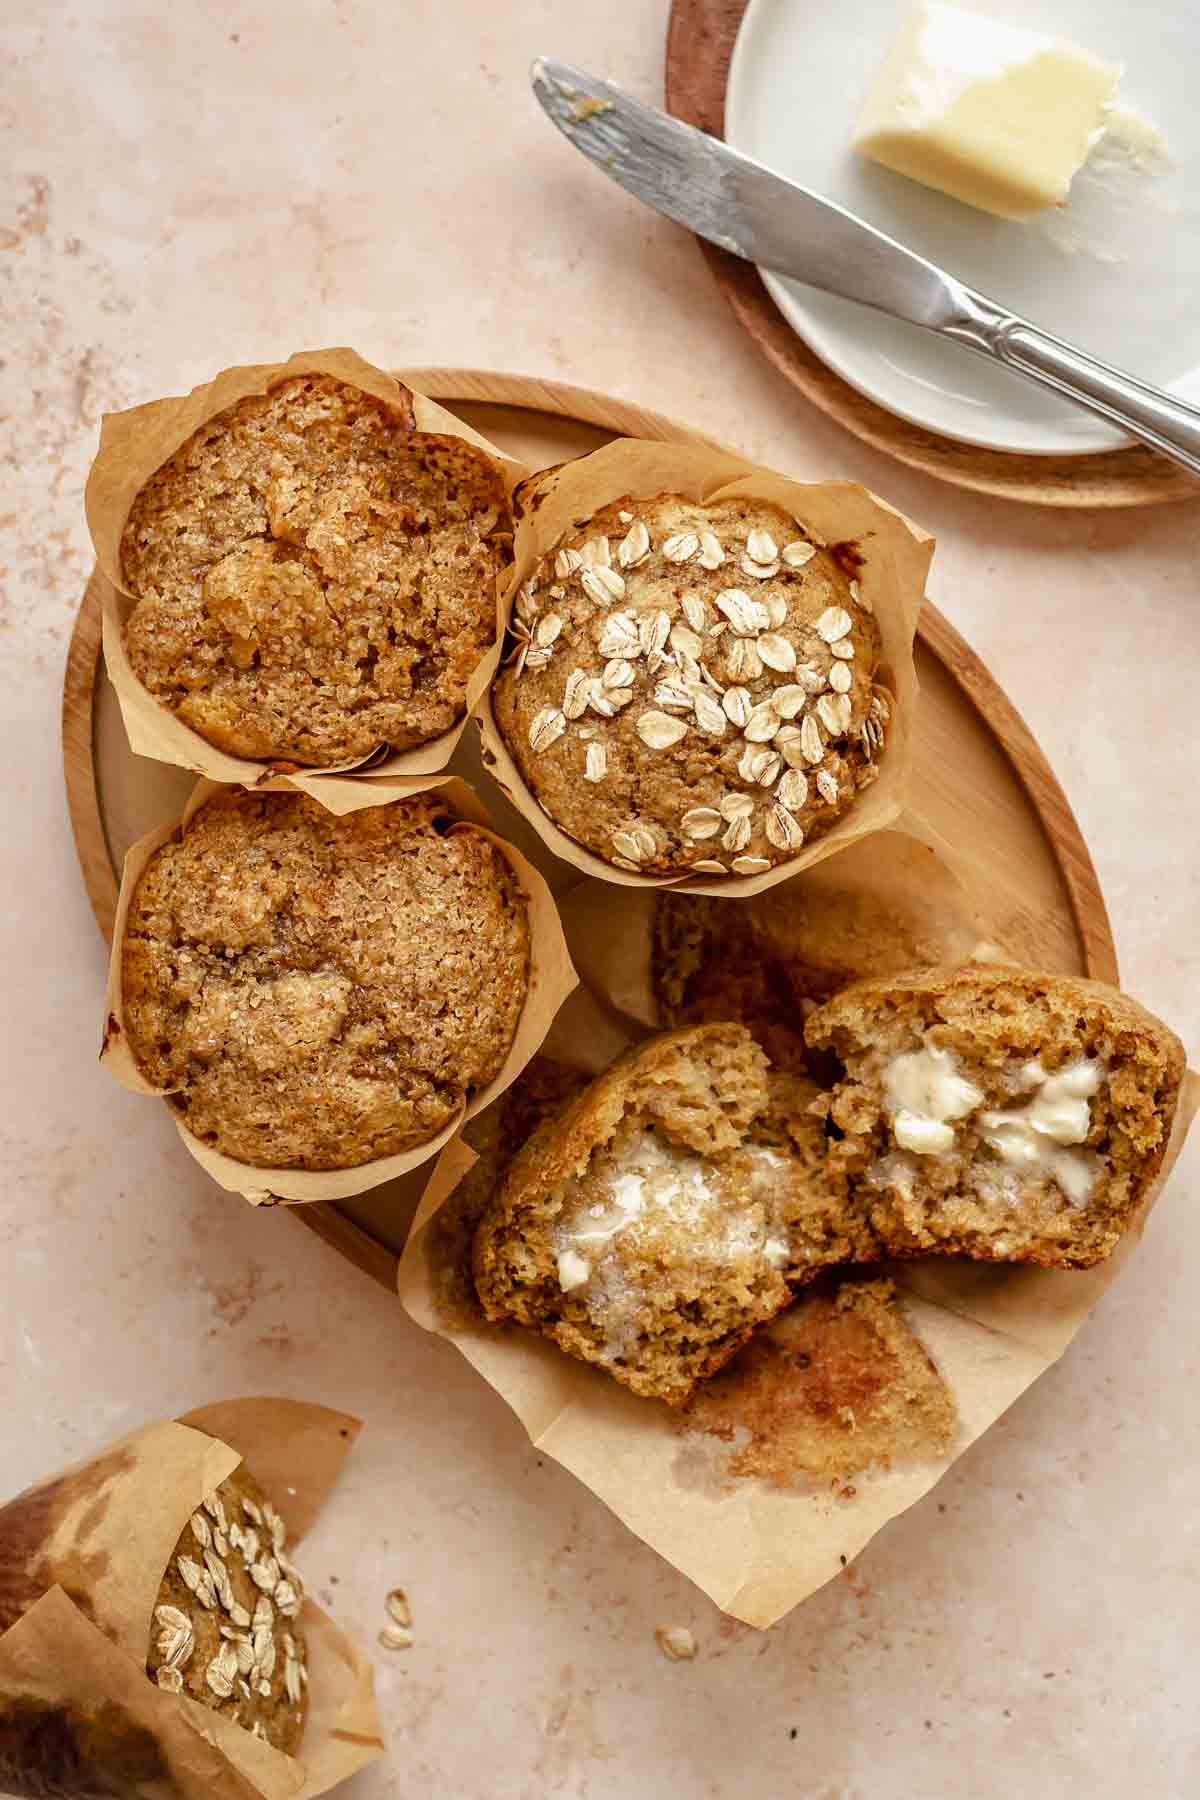 All-bran muffins on a plate. One is broken open.